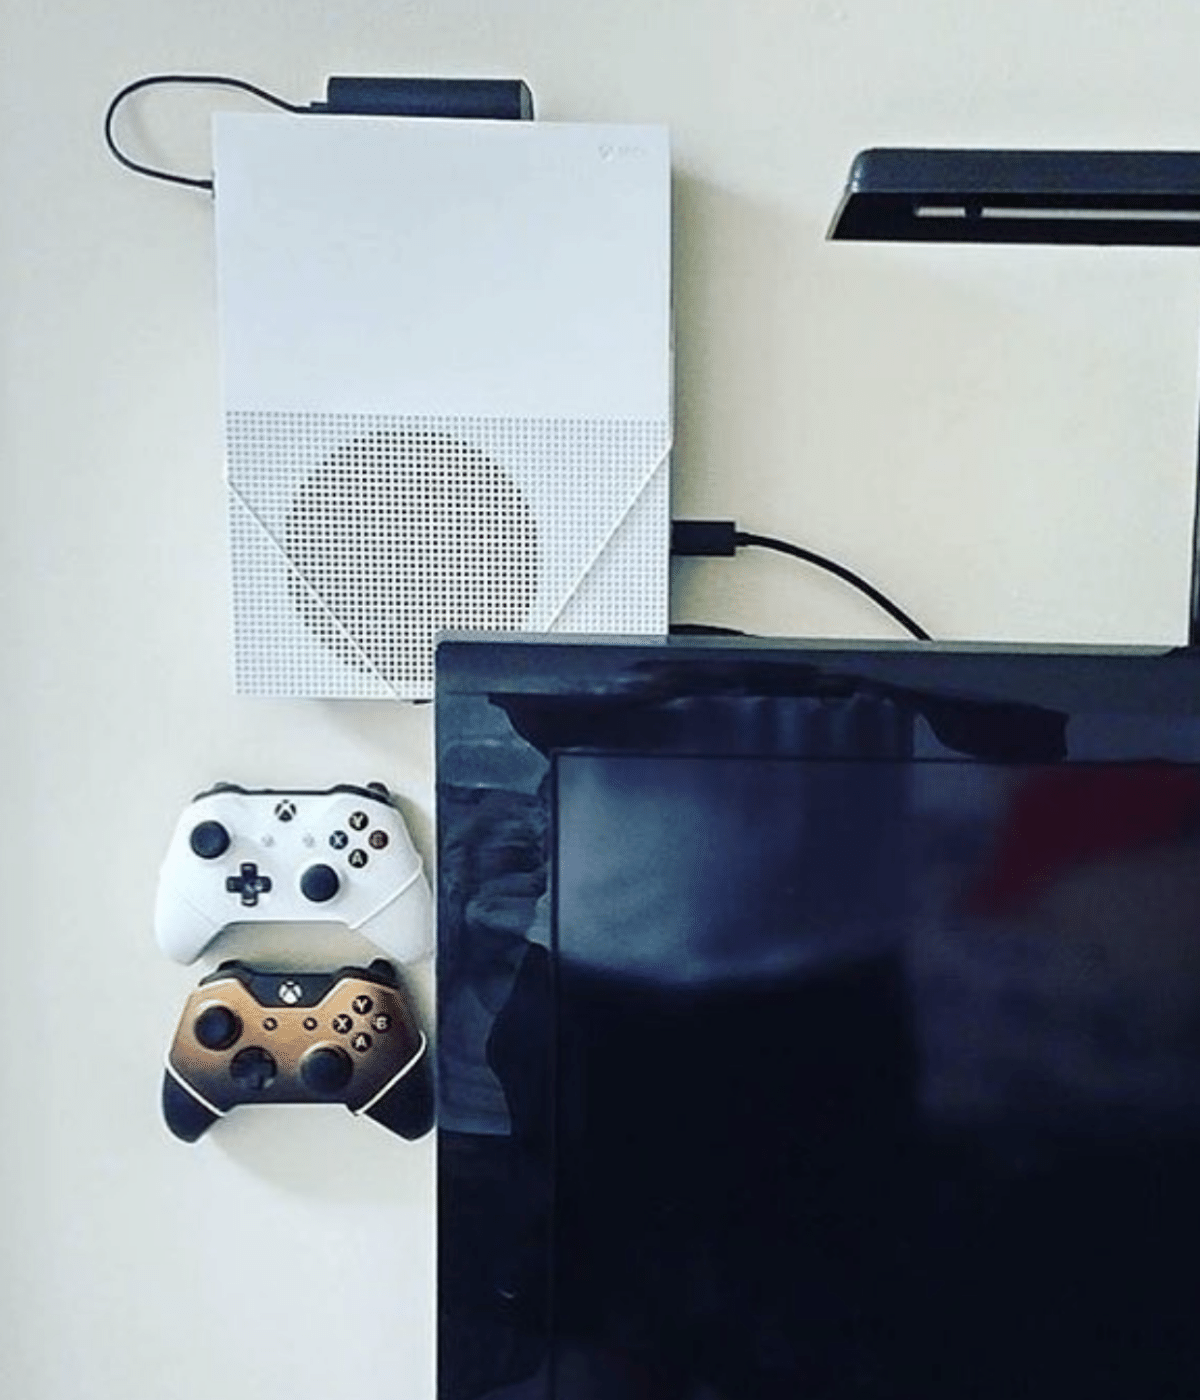 XBOX One S Wall Mount  Microsoft XBOX One S Compatible Mount